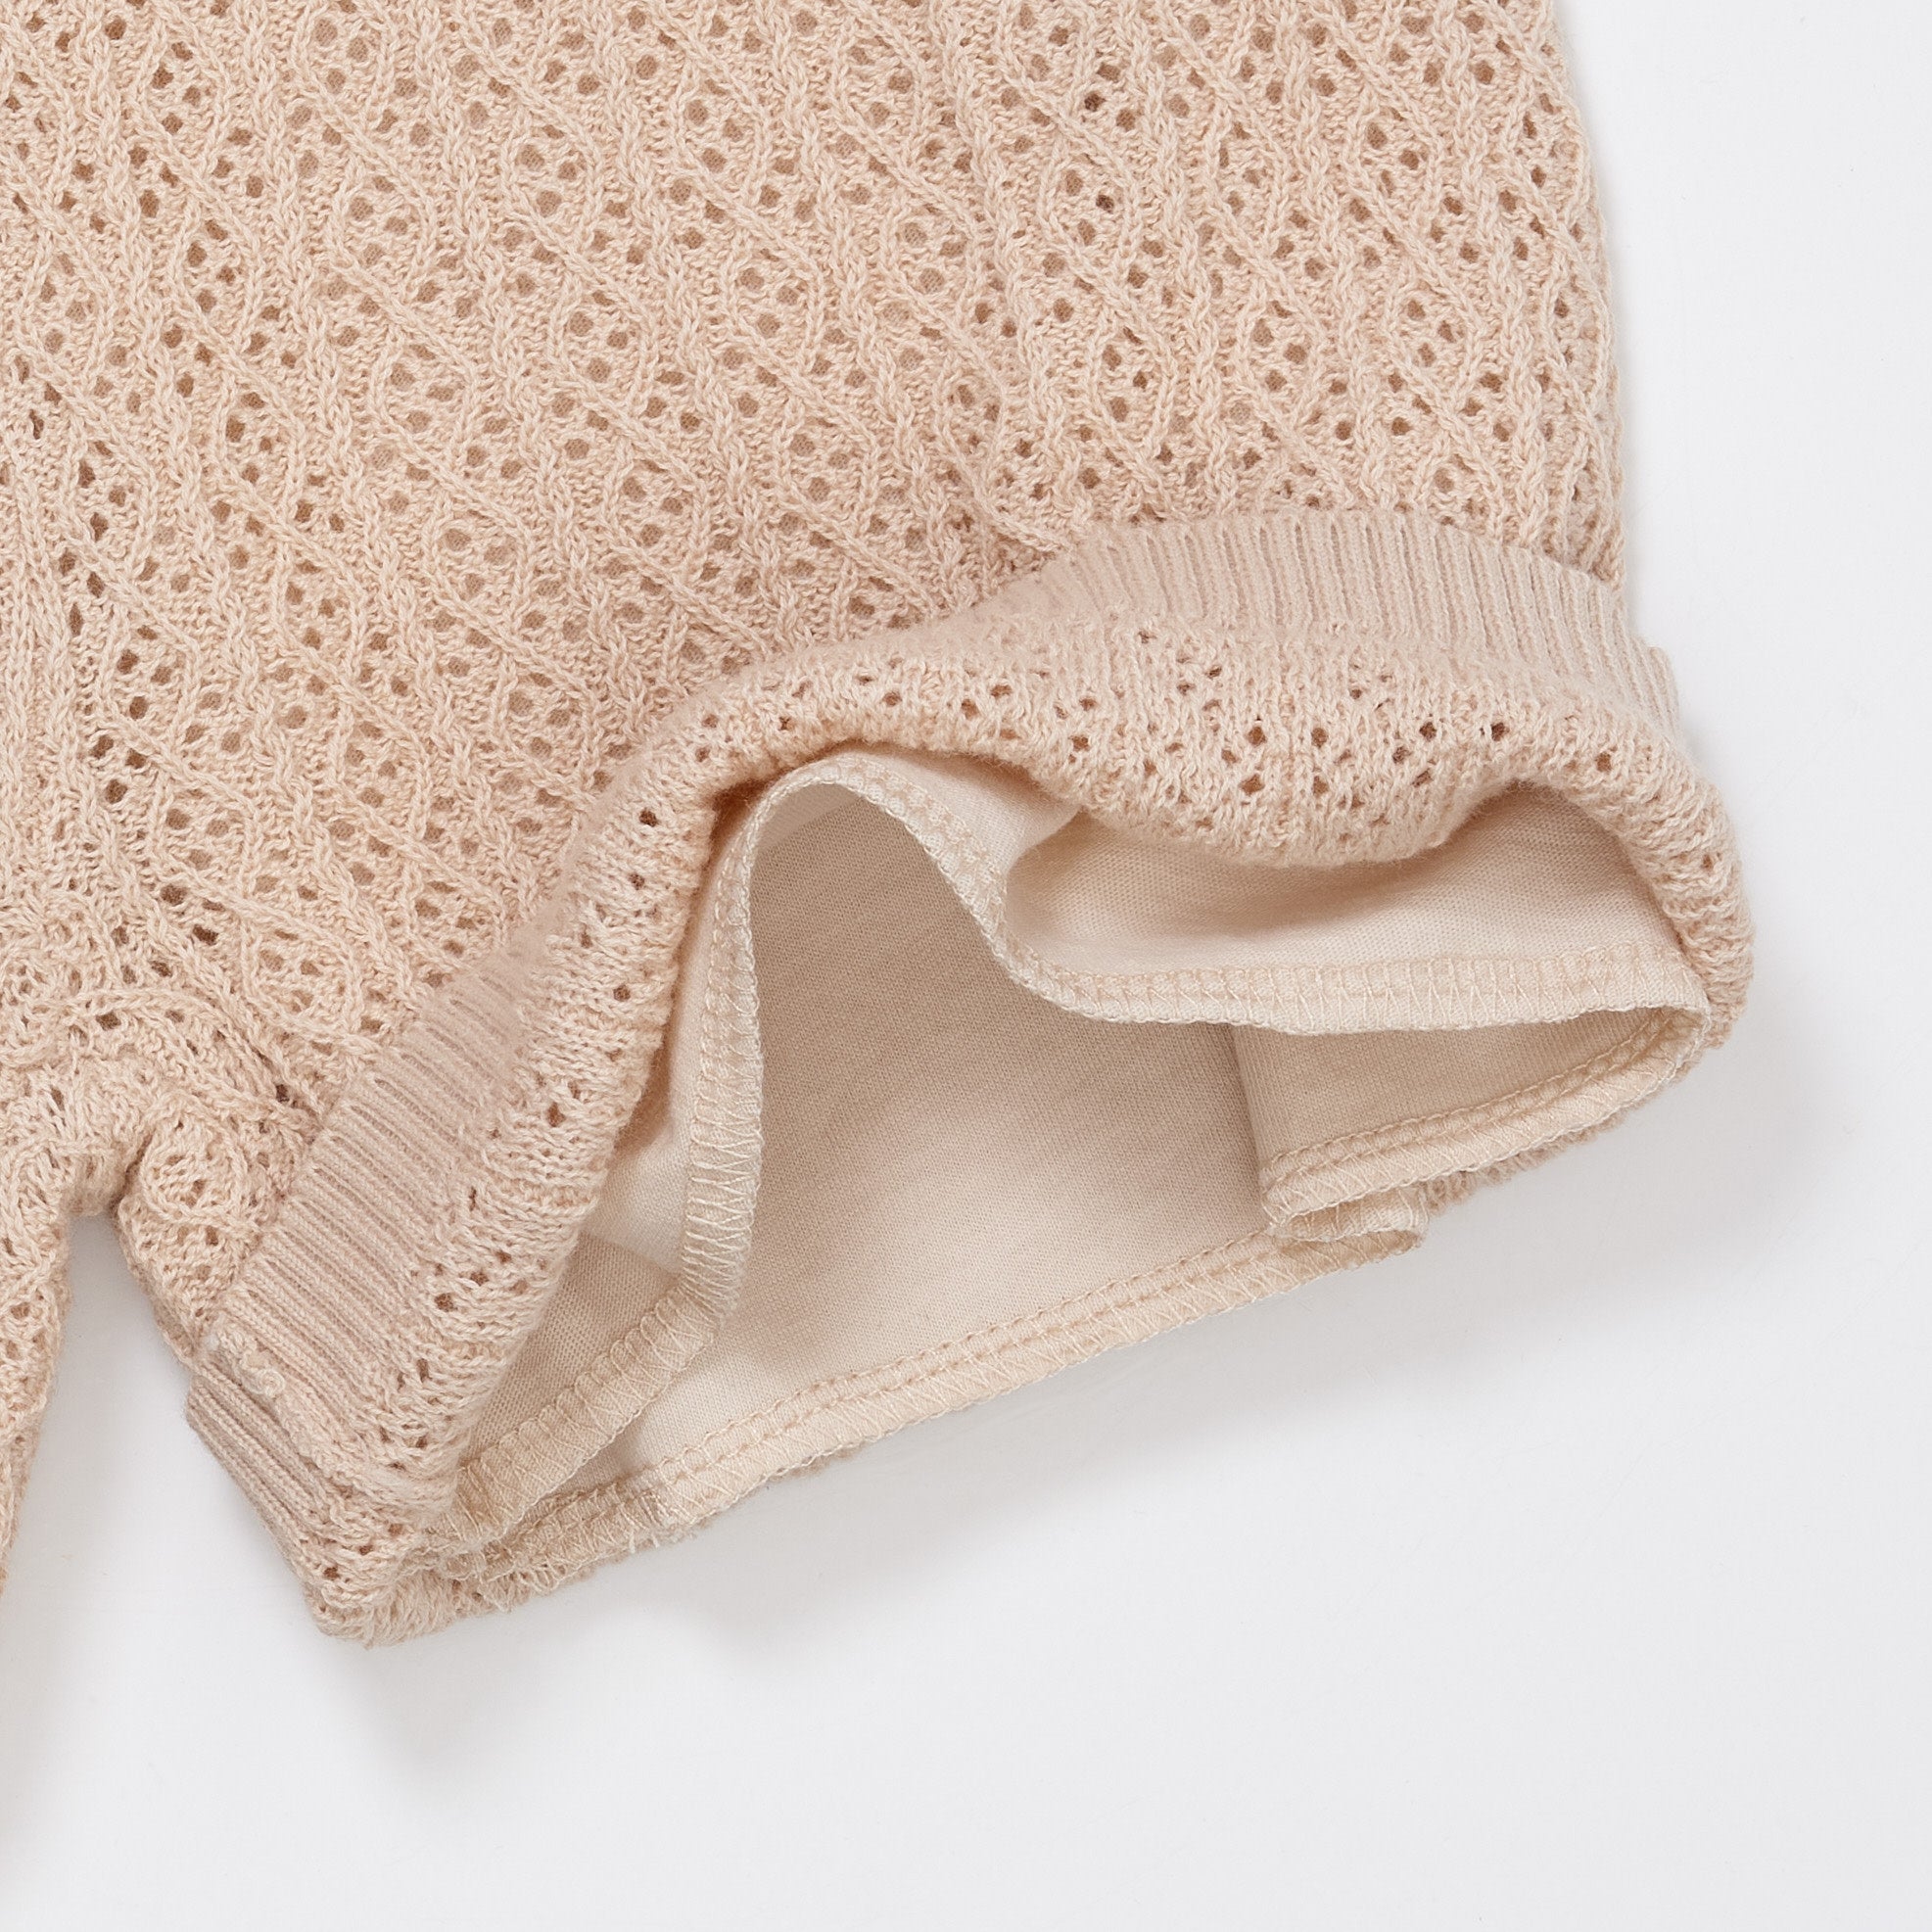 COPENHAGEN COLORS / POINTELLE KNITTED CABLE CARDIGAN - SAND/CREME